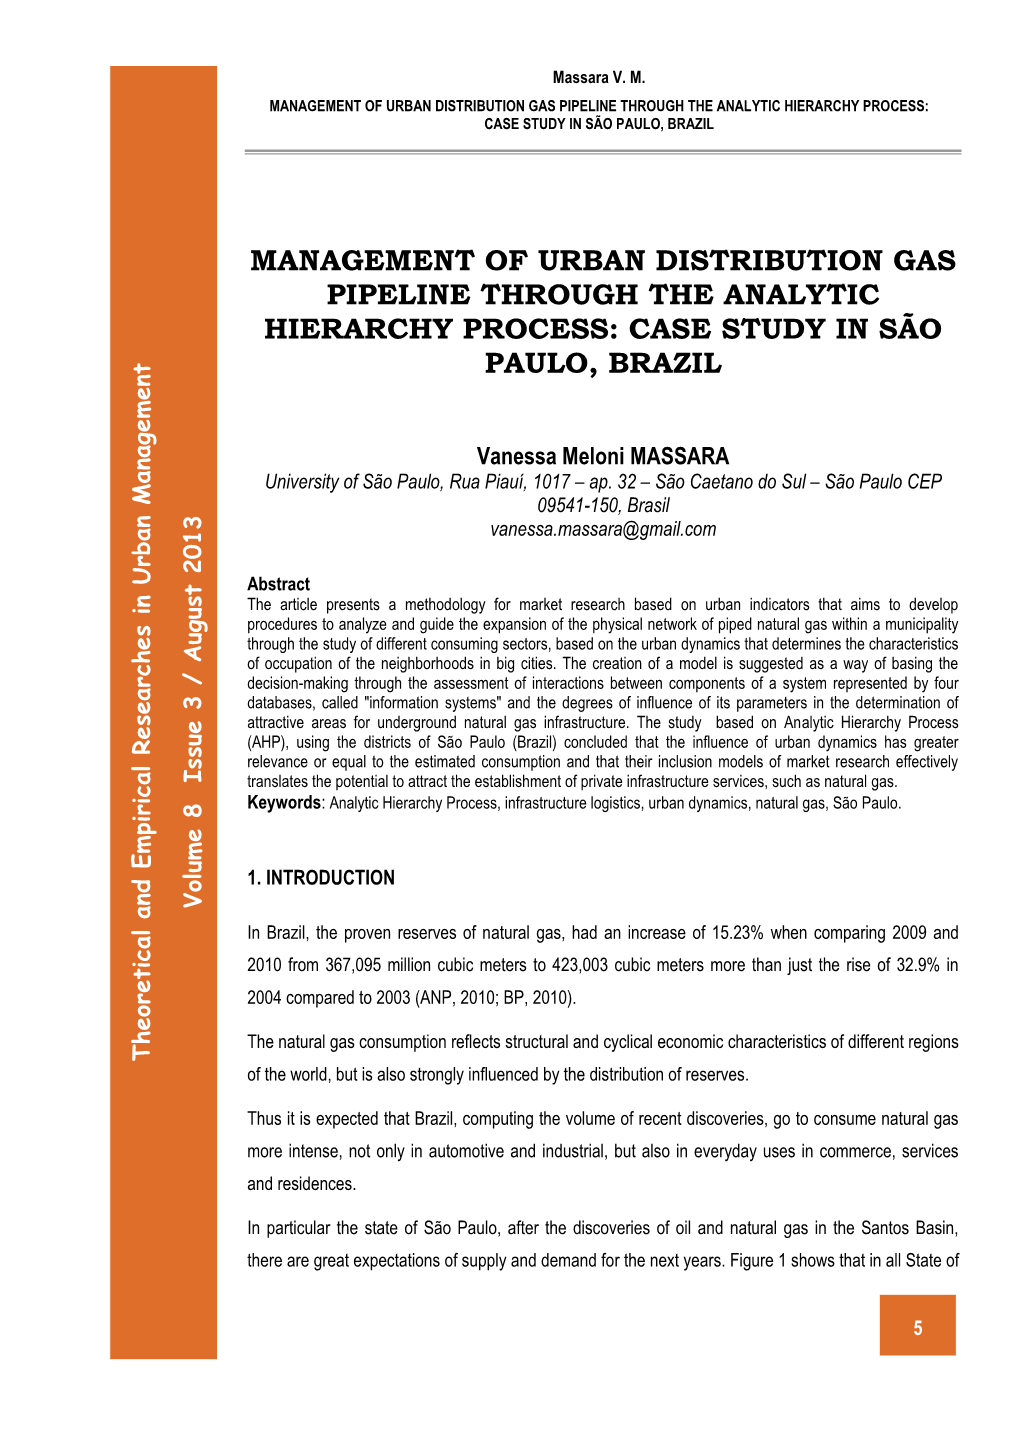 Nt MANAGEMENT of URBAN DISTRIBUTION GAS PIPELINE